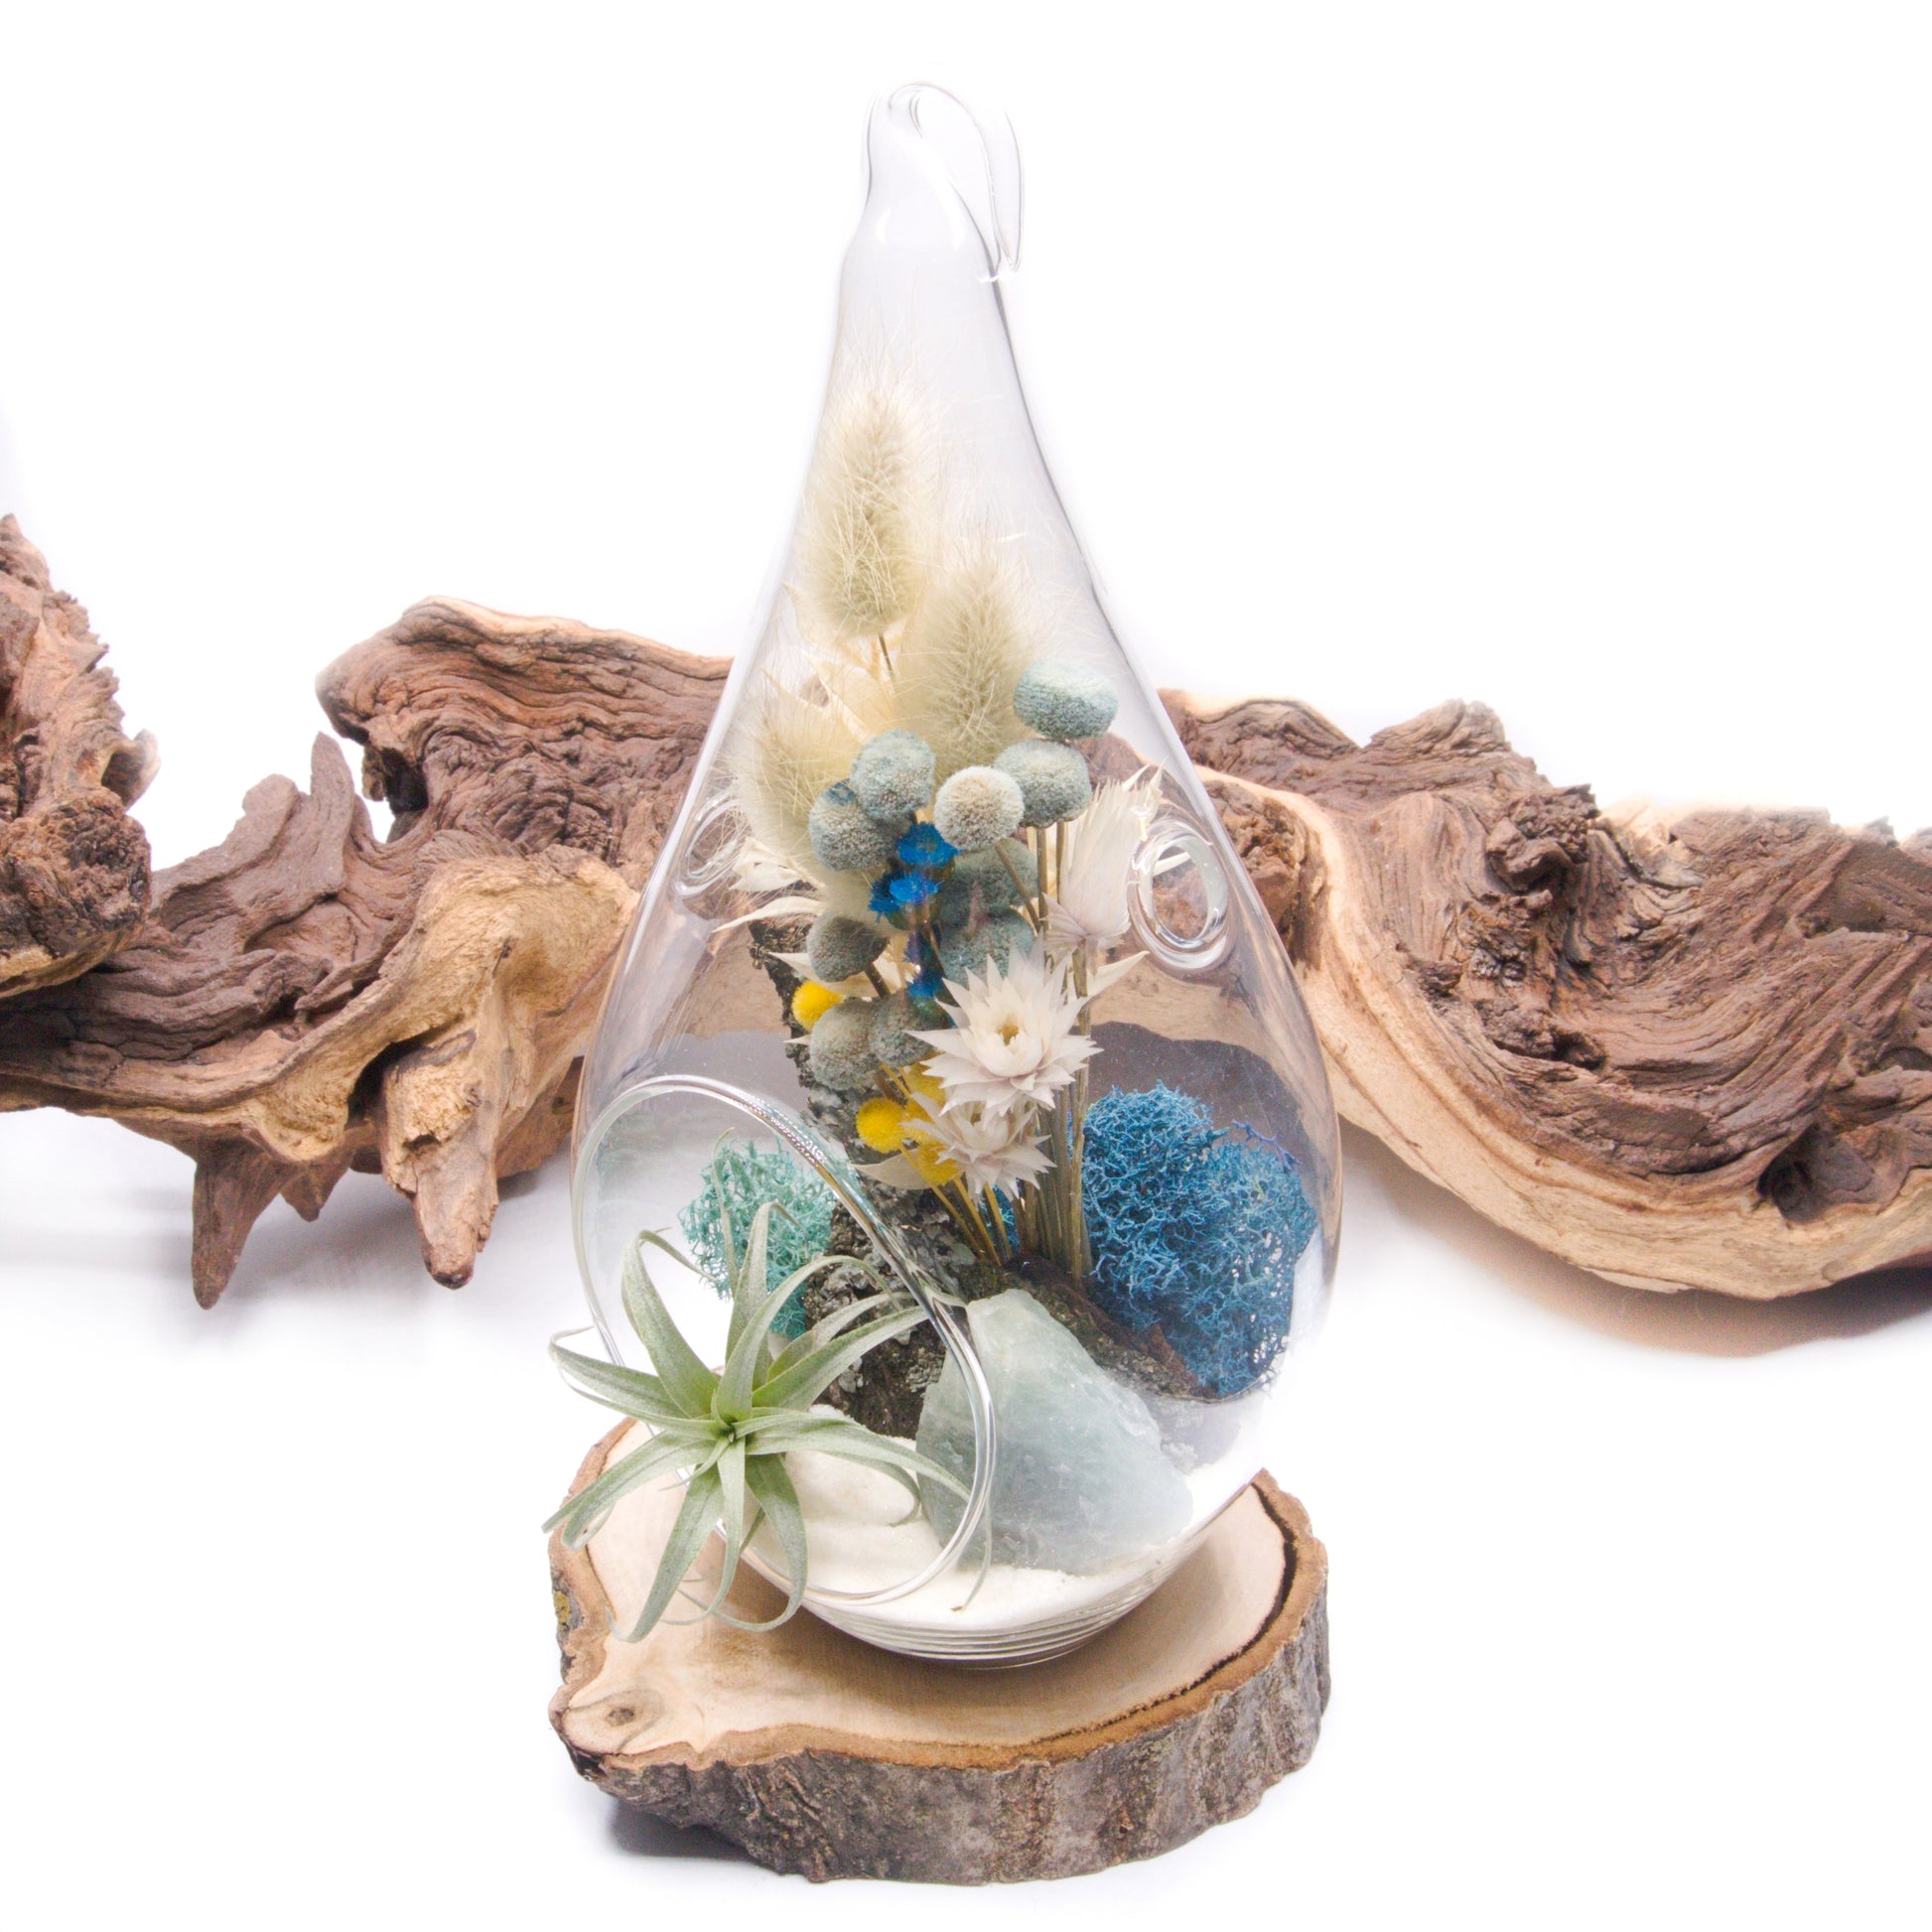 Glass tear-drop shaped airplant terrarium with a bouquet of dried flowers, moss, wood and an aquamarine crystal